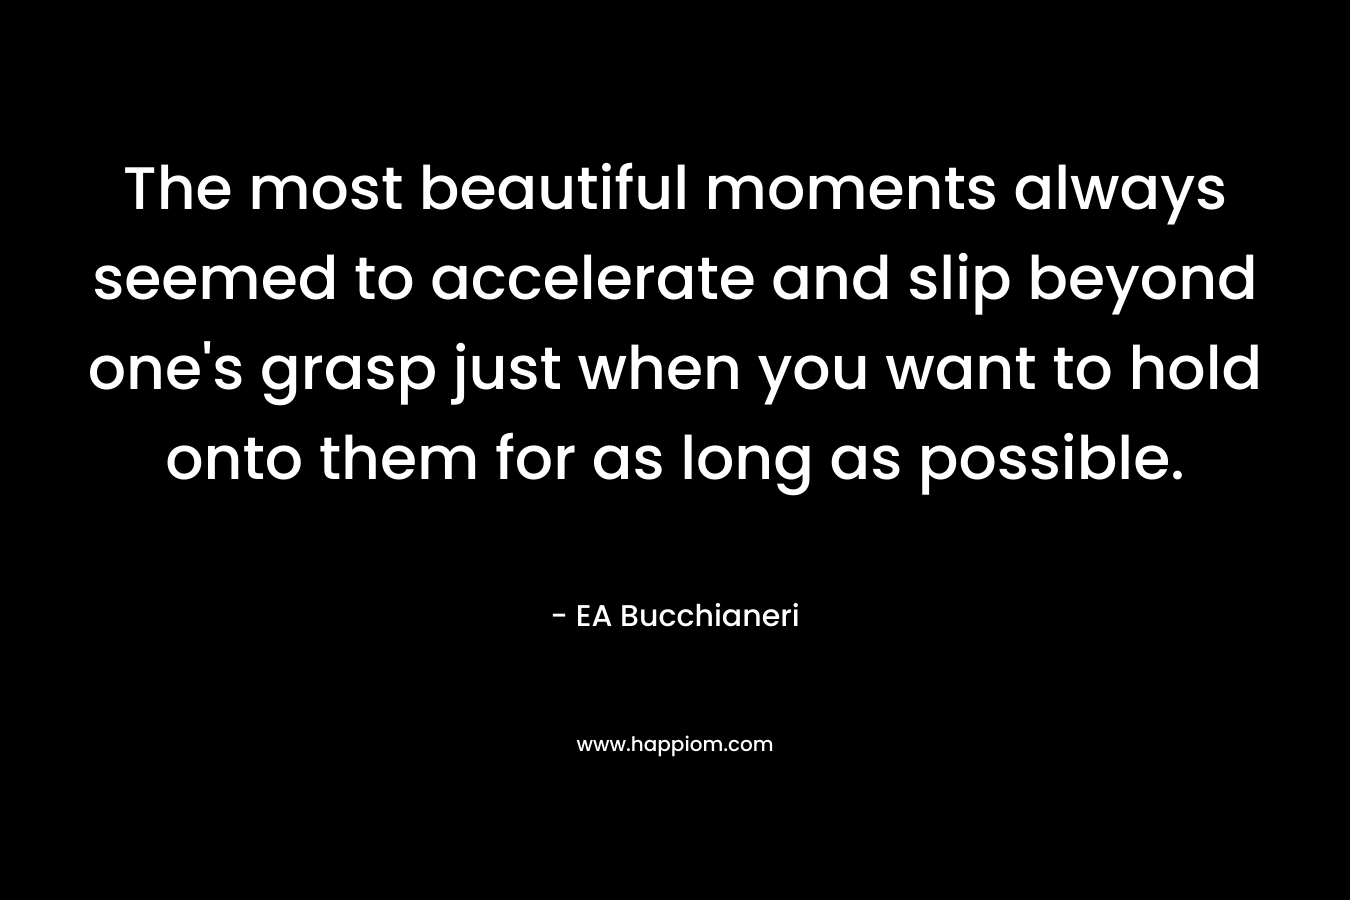 The most beautiful moments always seemed to accelerate and slip beyond one’s grasp just when you want to hold onto them for as long as possible. – EA Bucchianeri